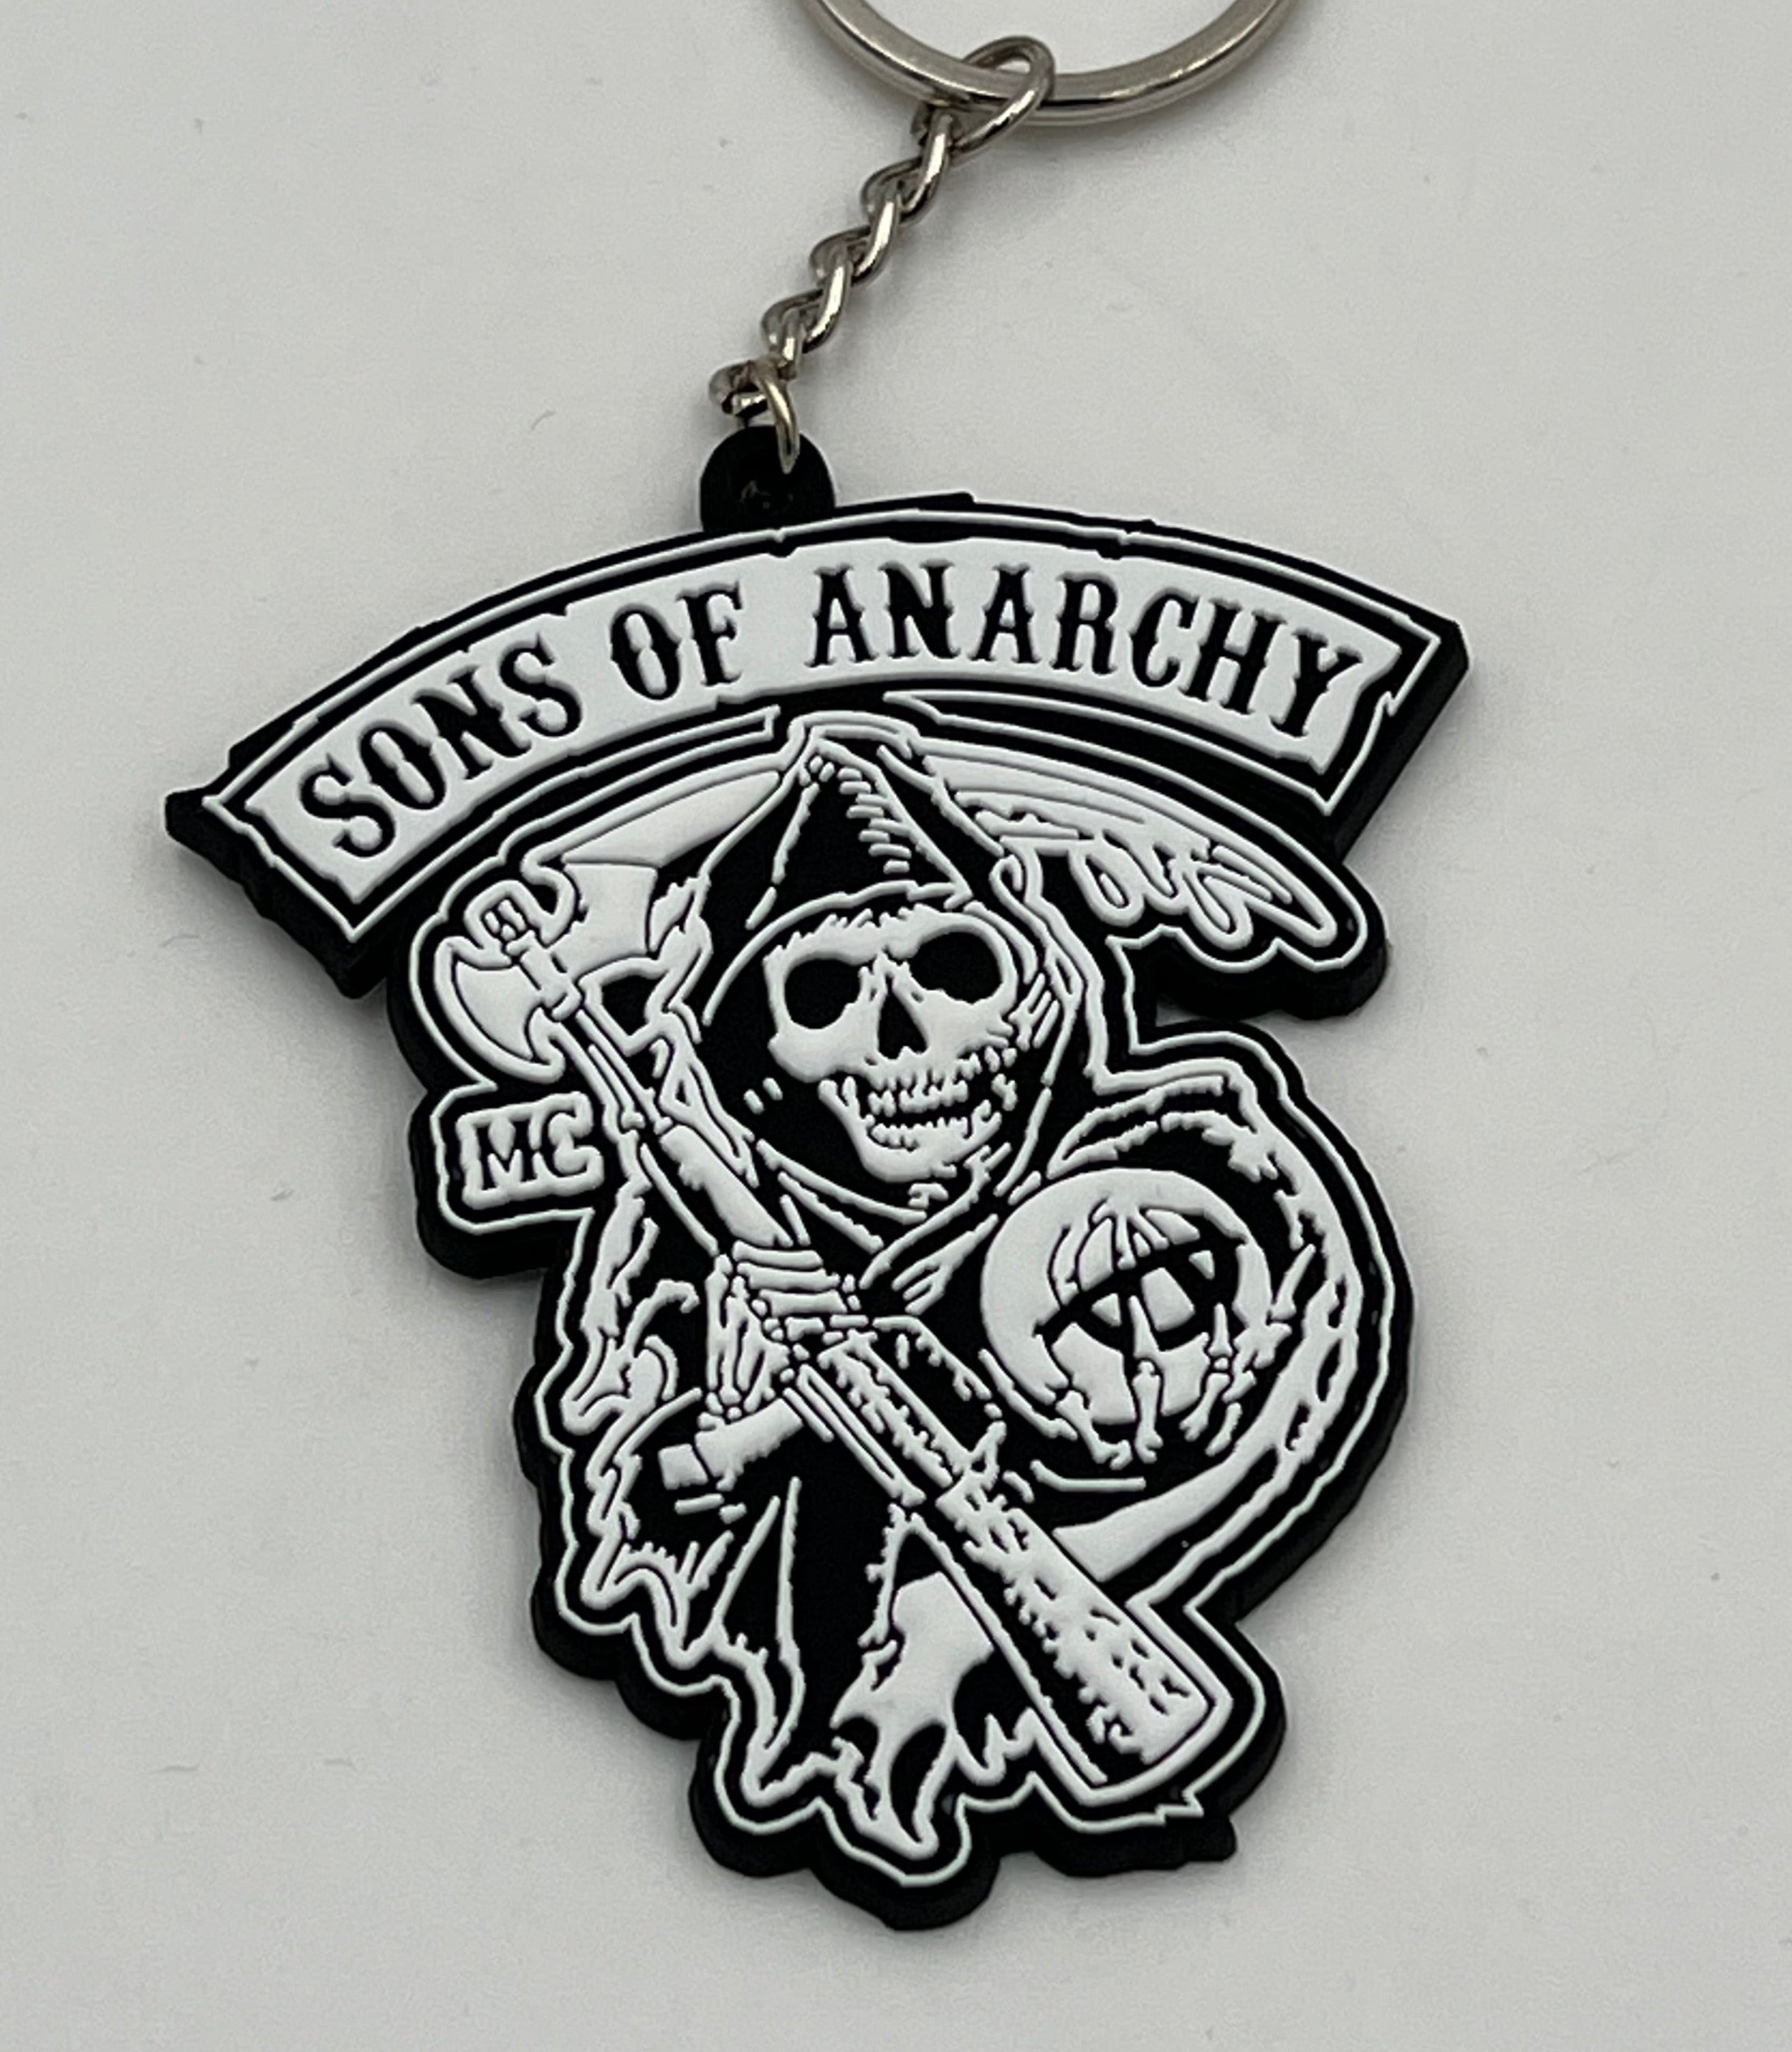 Keychain - SOA / Sons of Anarchy